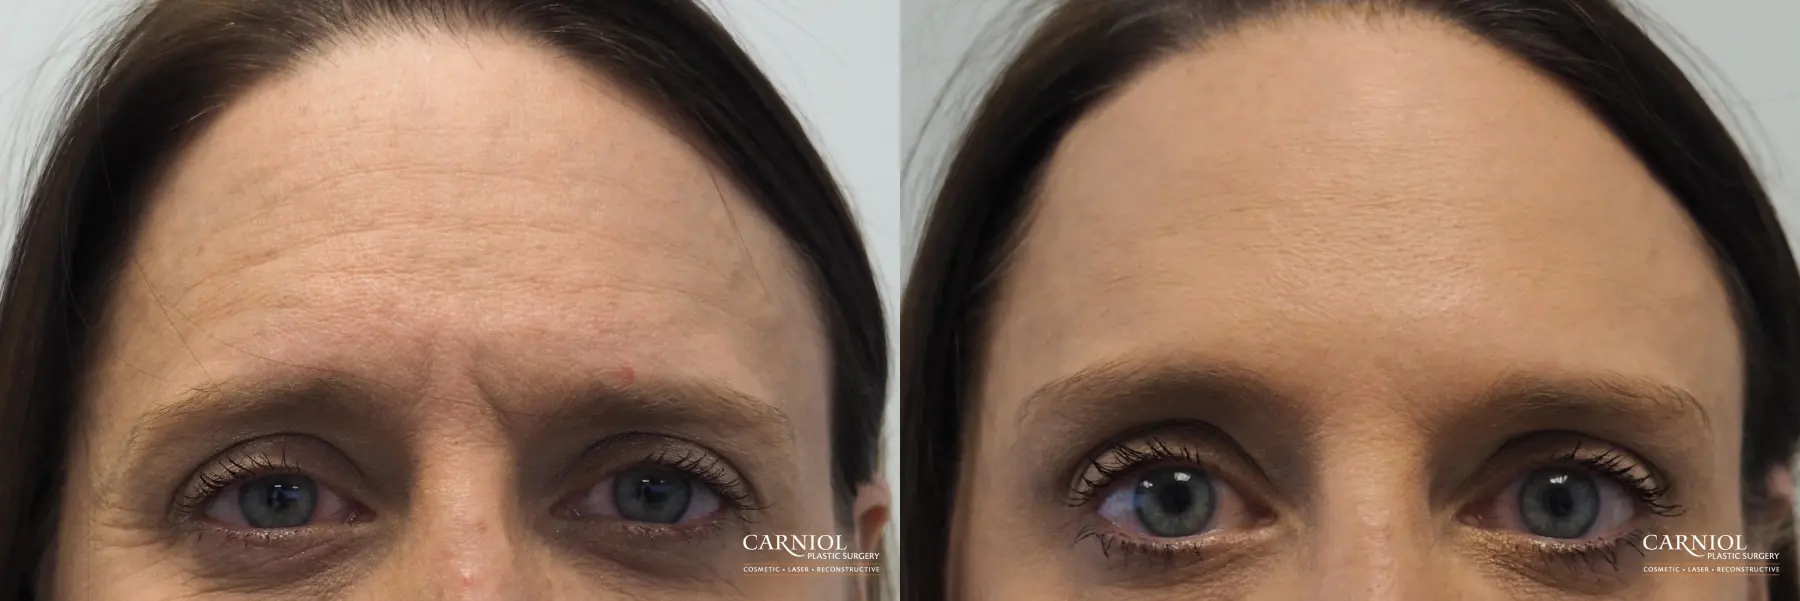 BOTOX® Cosmetic: Patient 4 - Before and After 1